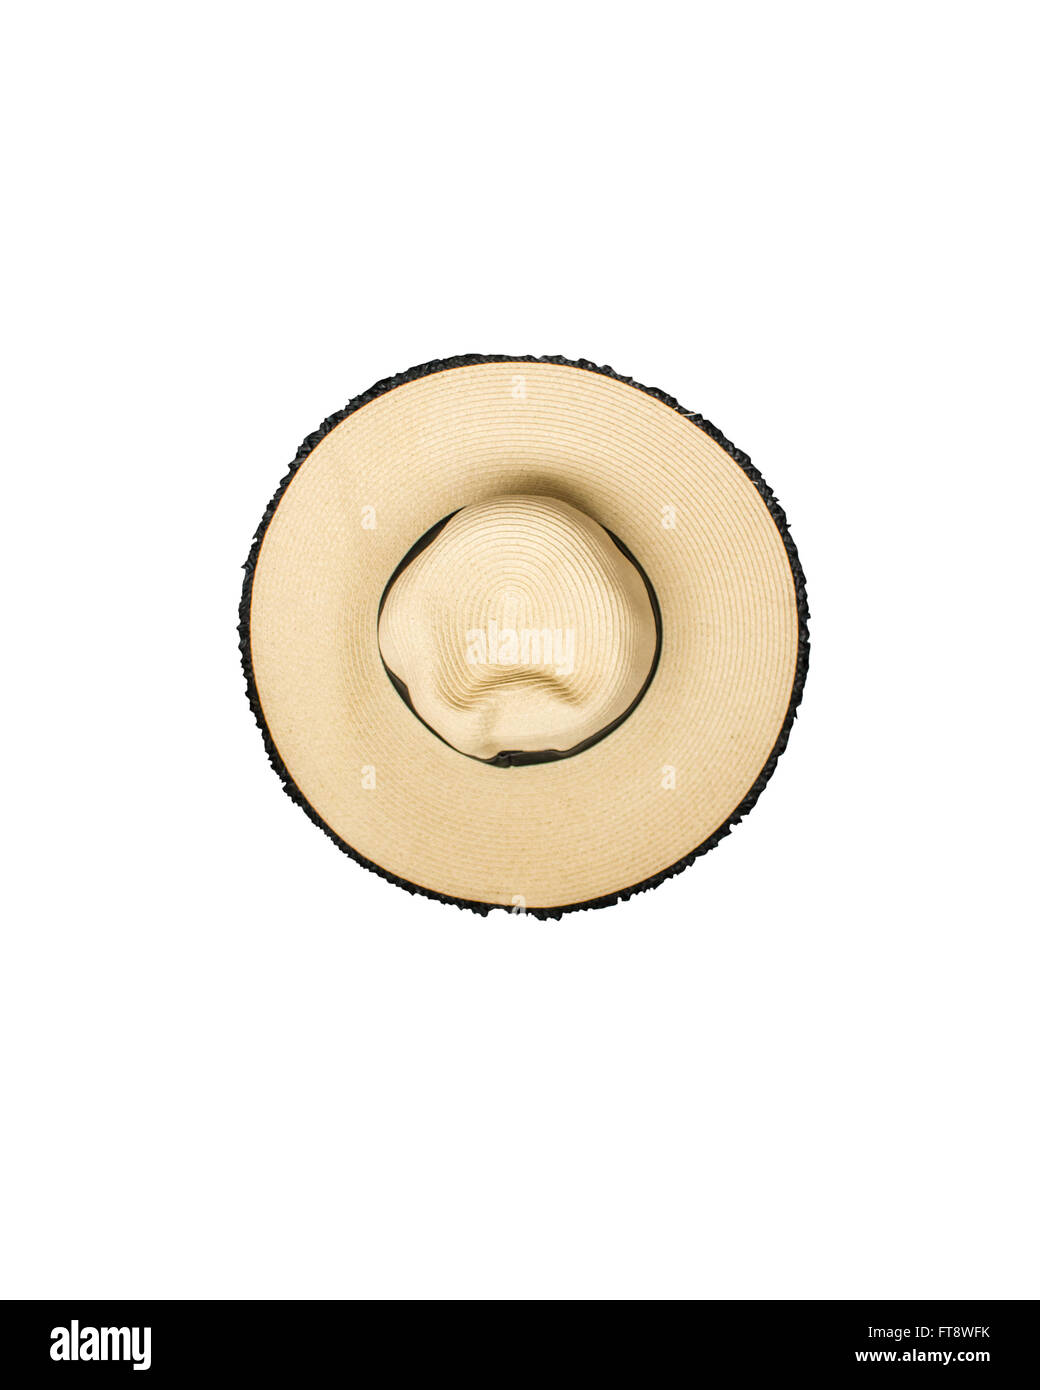 Top view of straw hat isolated on a white background Stock Photo